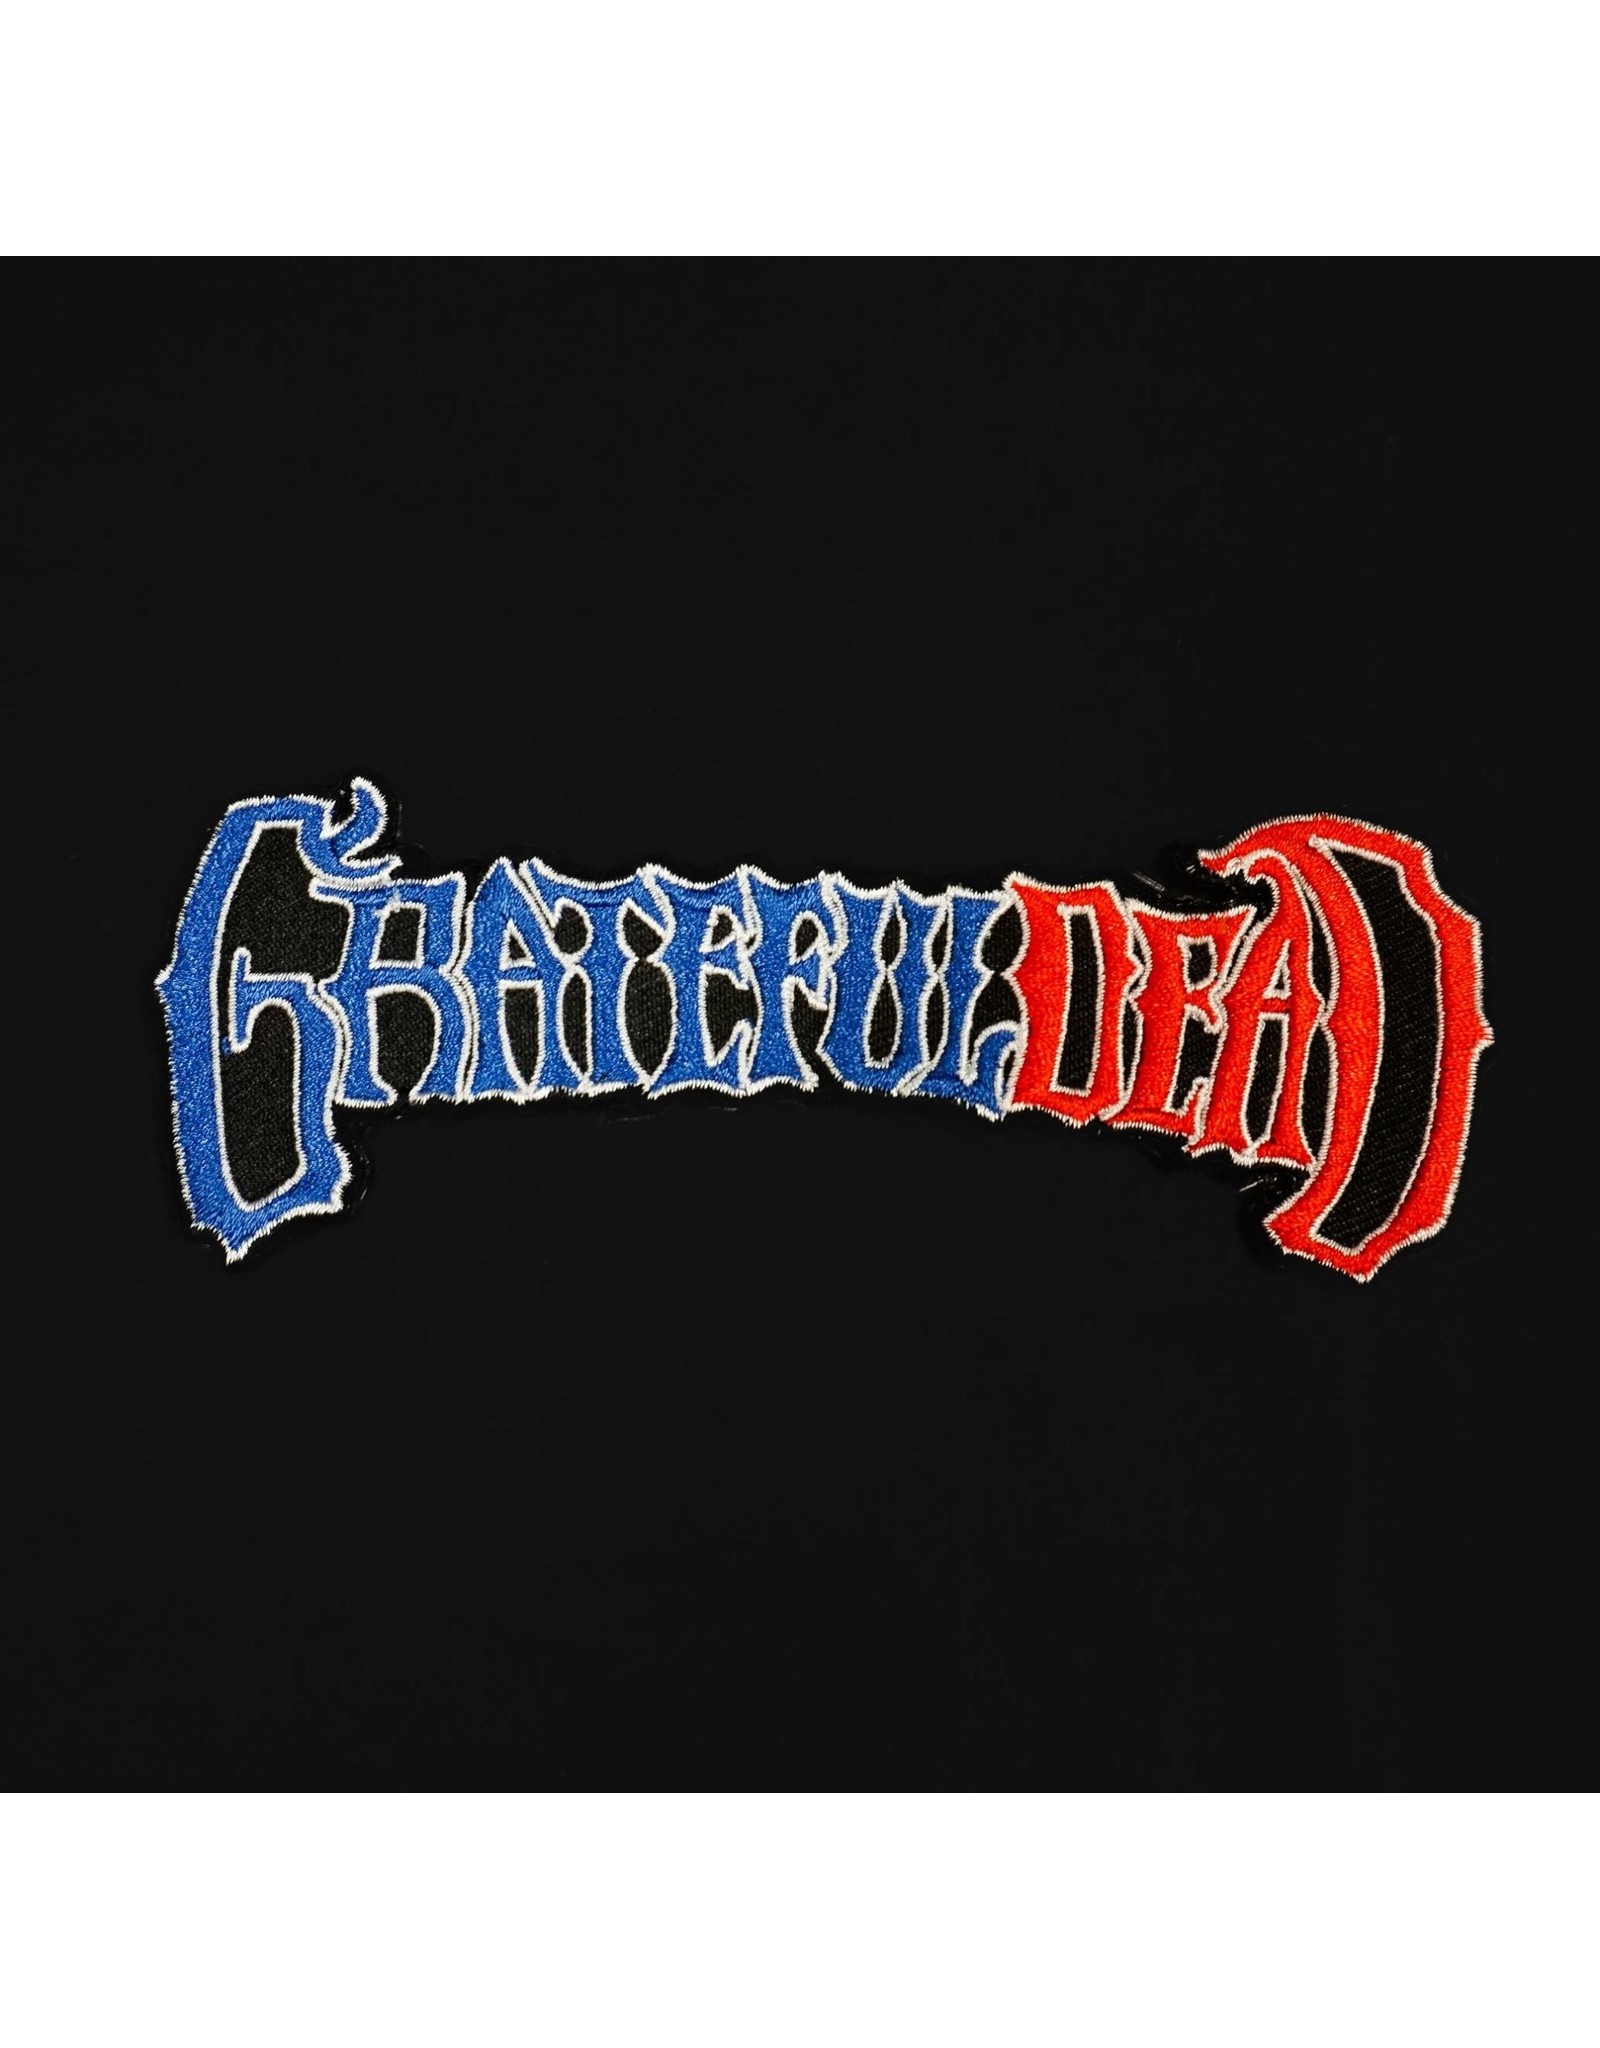 Patch - Grateful Dead Red White & Blue Banner